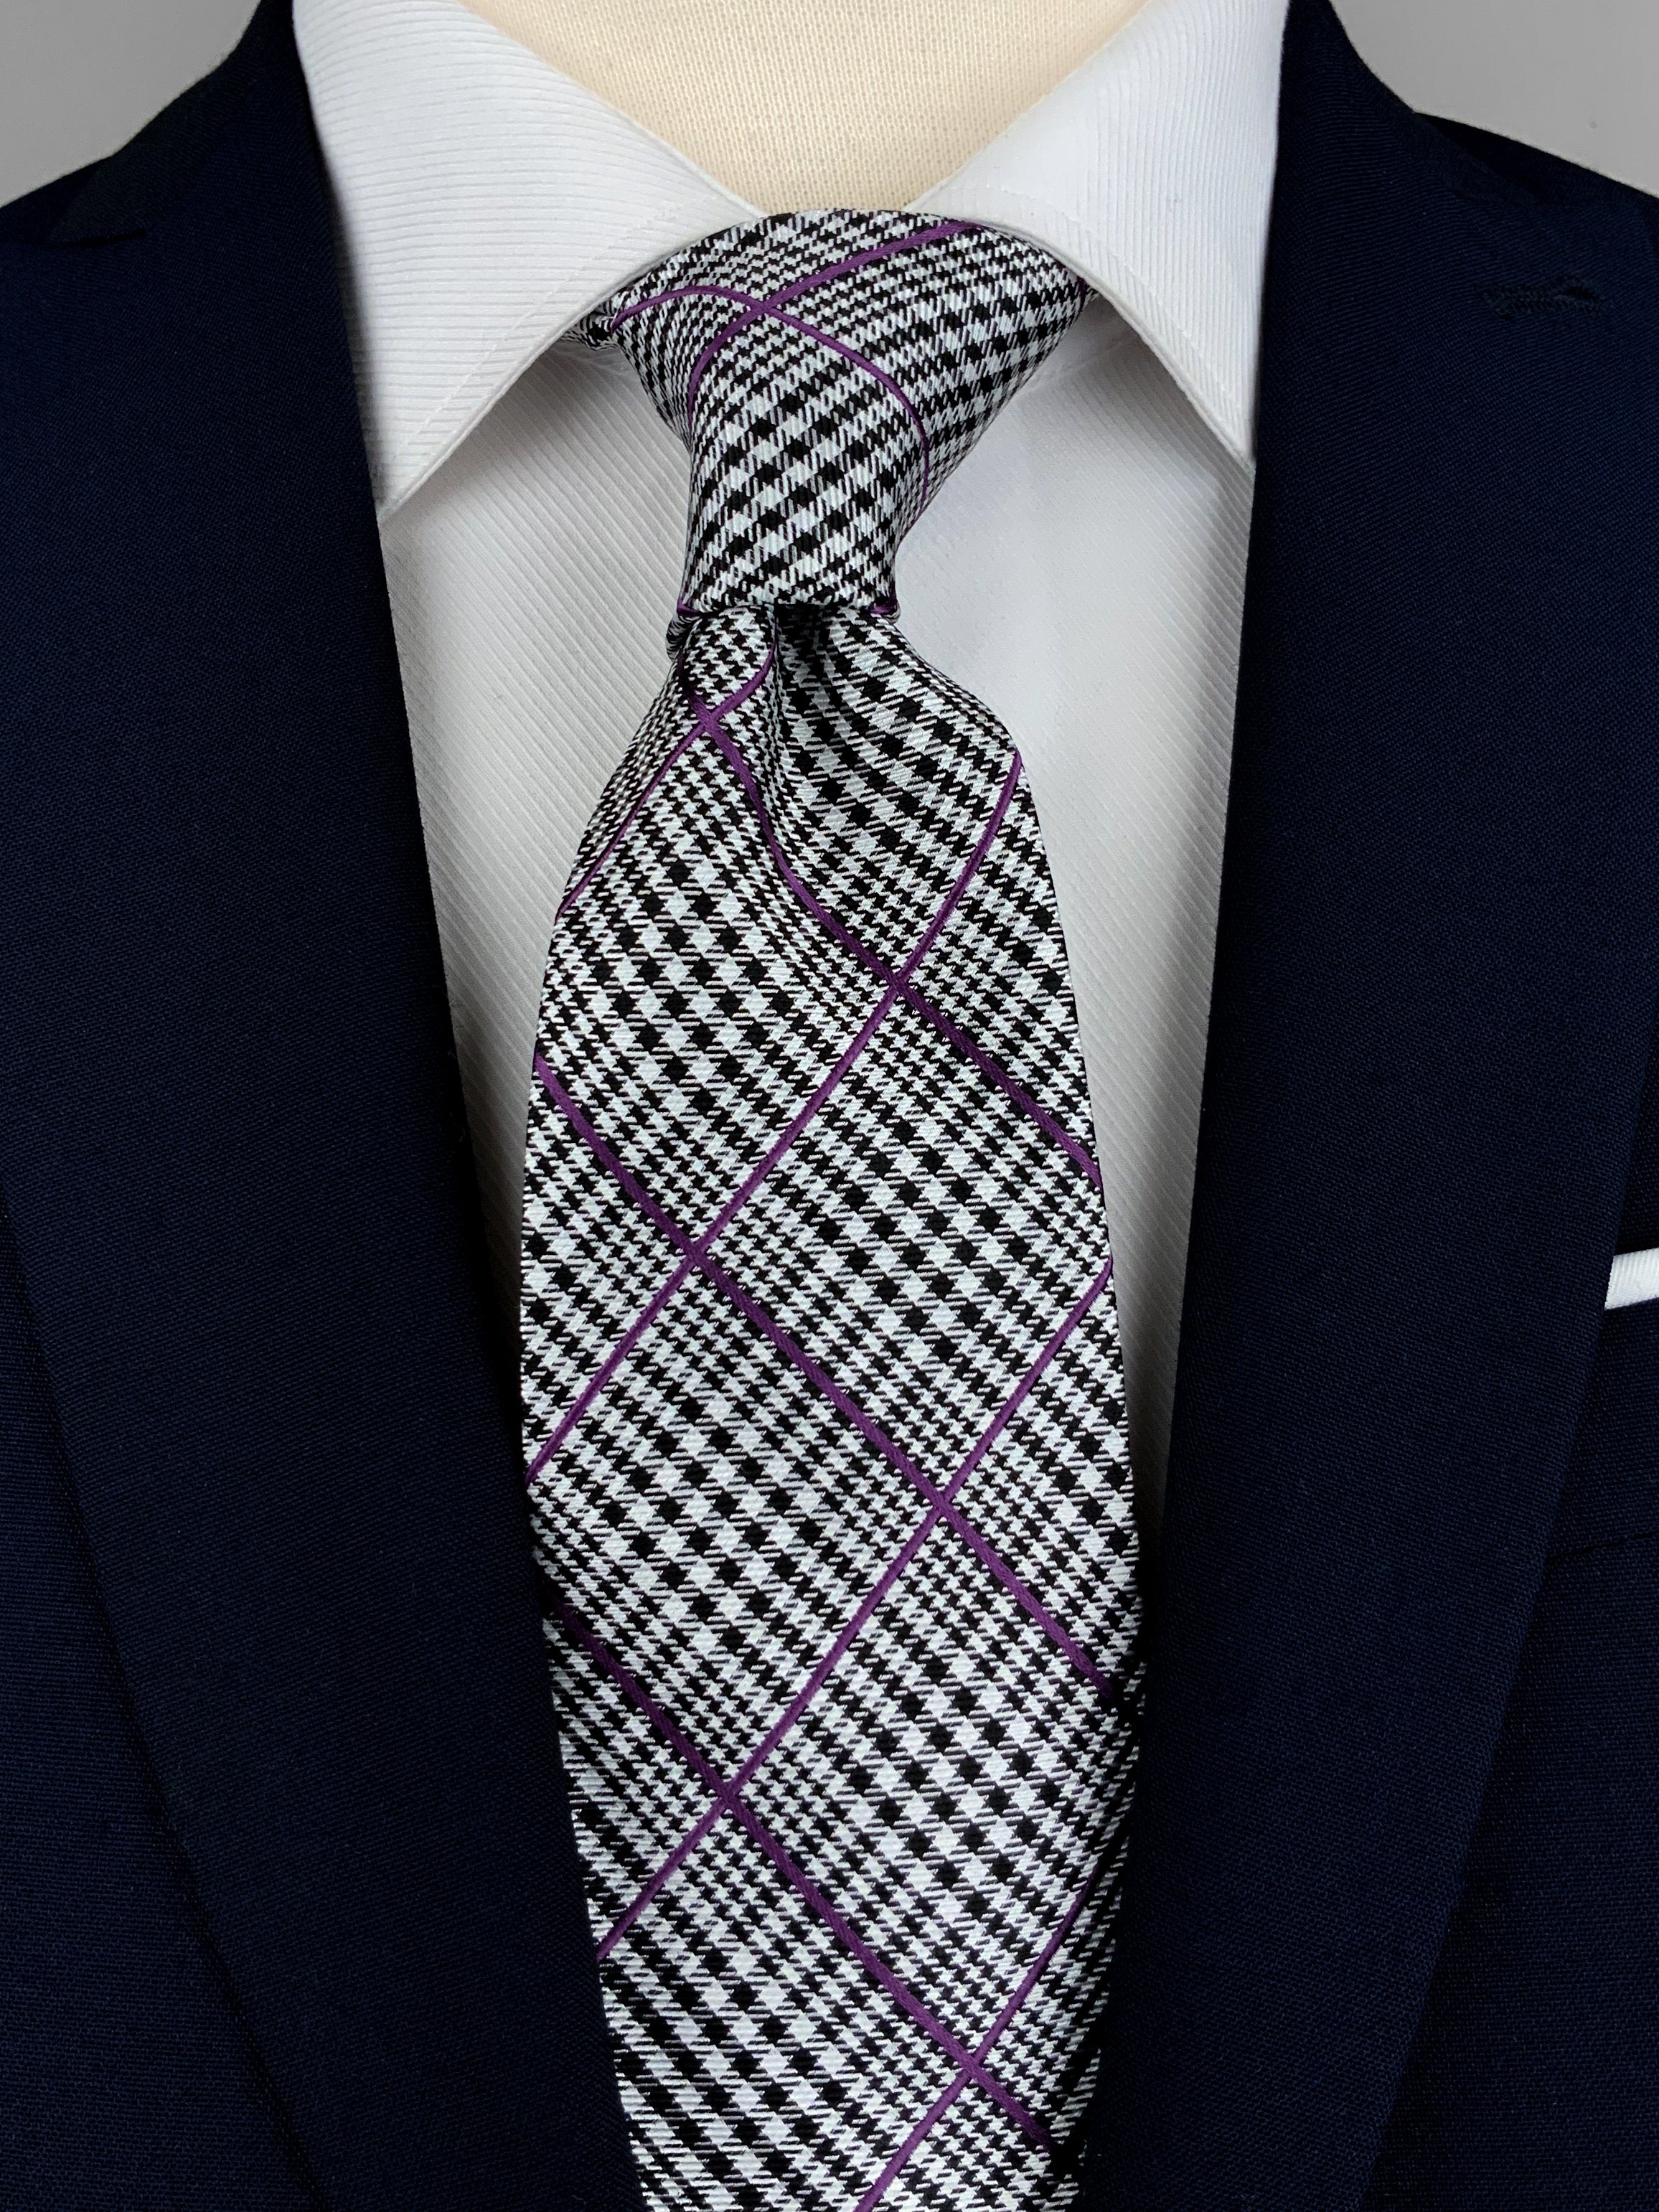 Prince of Wales Check, also known as Glen Plaid, silk twill tie in black and white with woven detailing on top in a purple hue worn with a white shirt and a navy suit